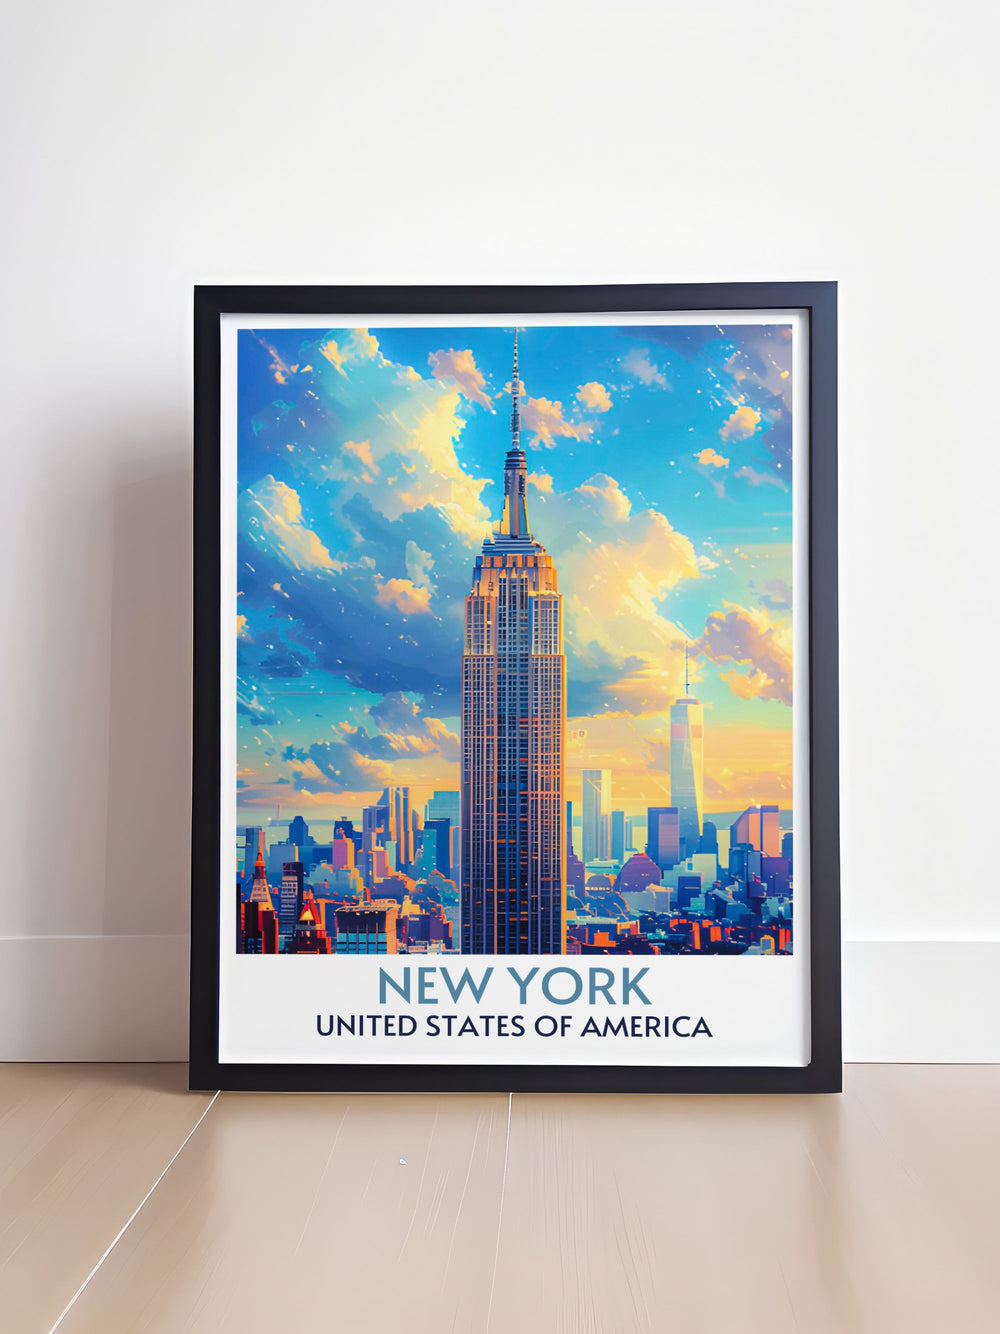 Home decor featuring the Empire State Building, perfect for adding a touch of New York elegance to any interior.